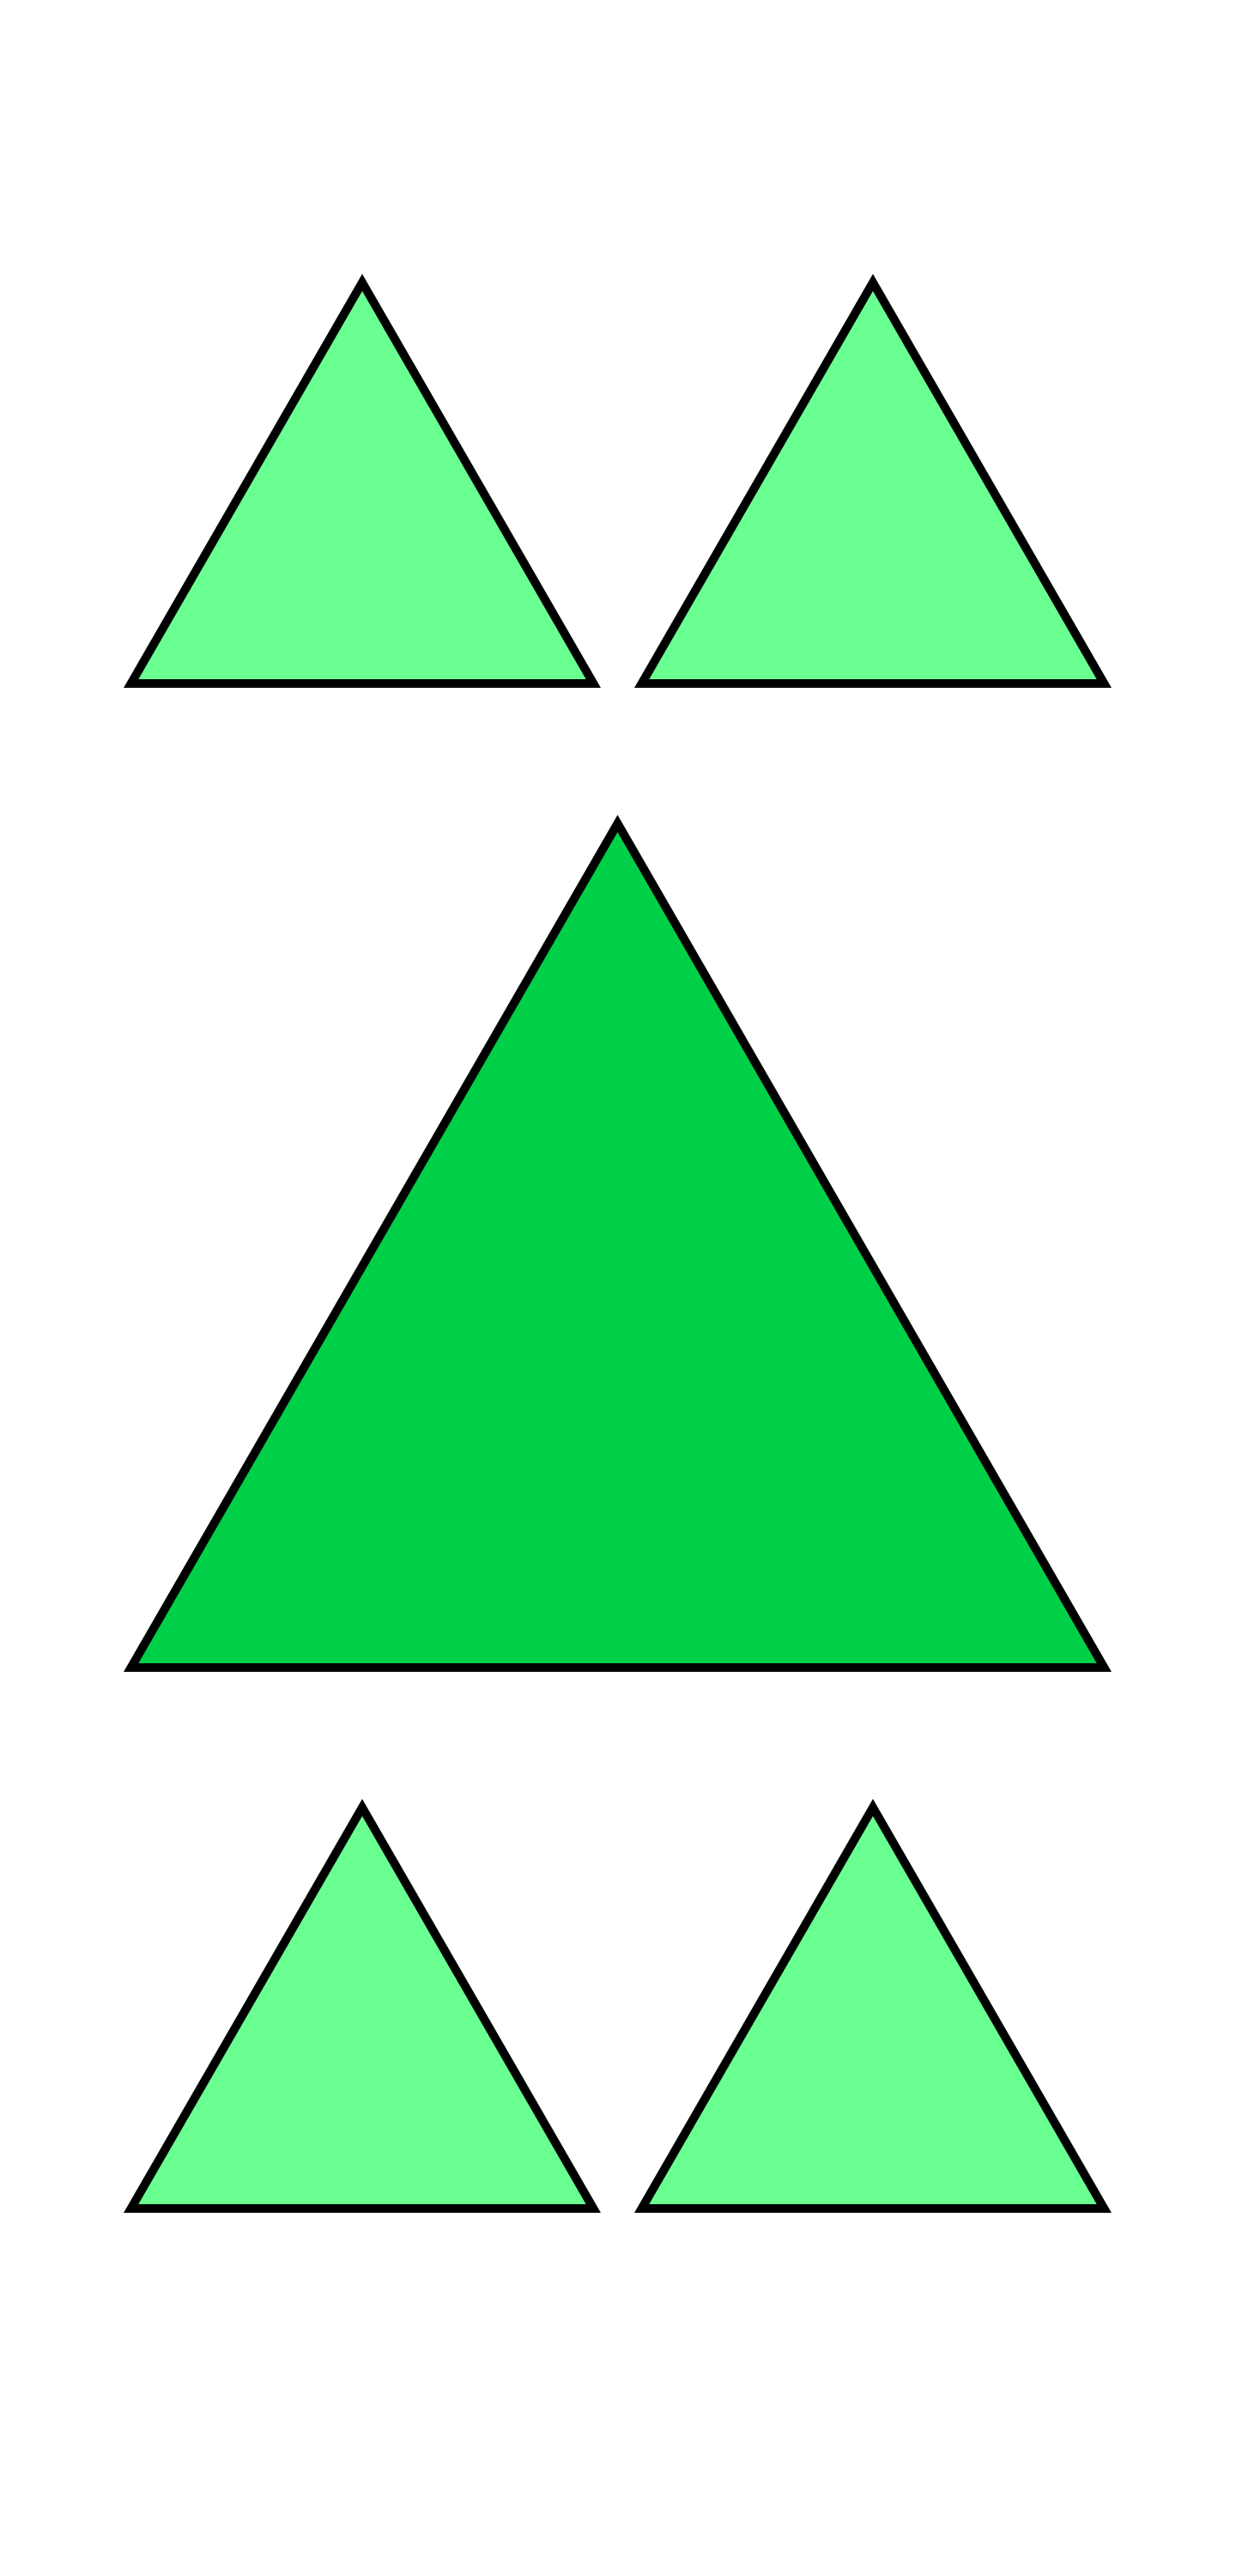 green triangles on a grid